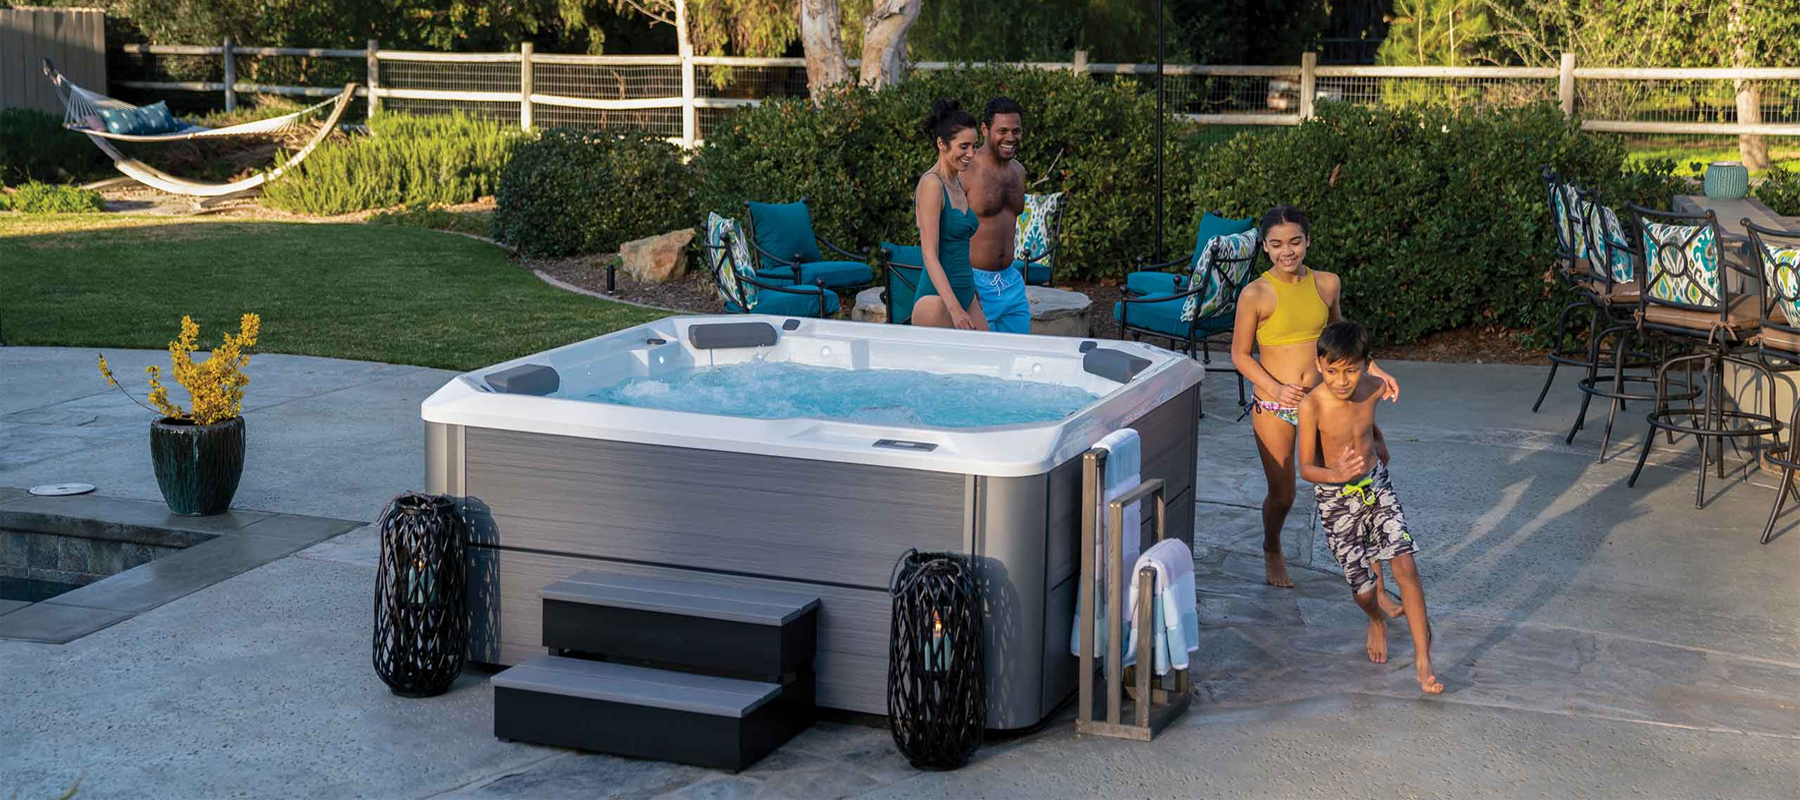 How Much Does a Hot Spring Hot Tub Cost?